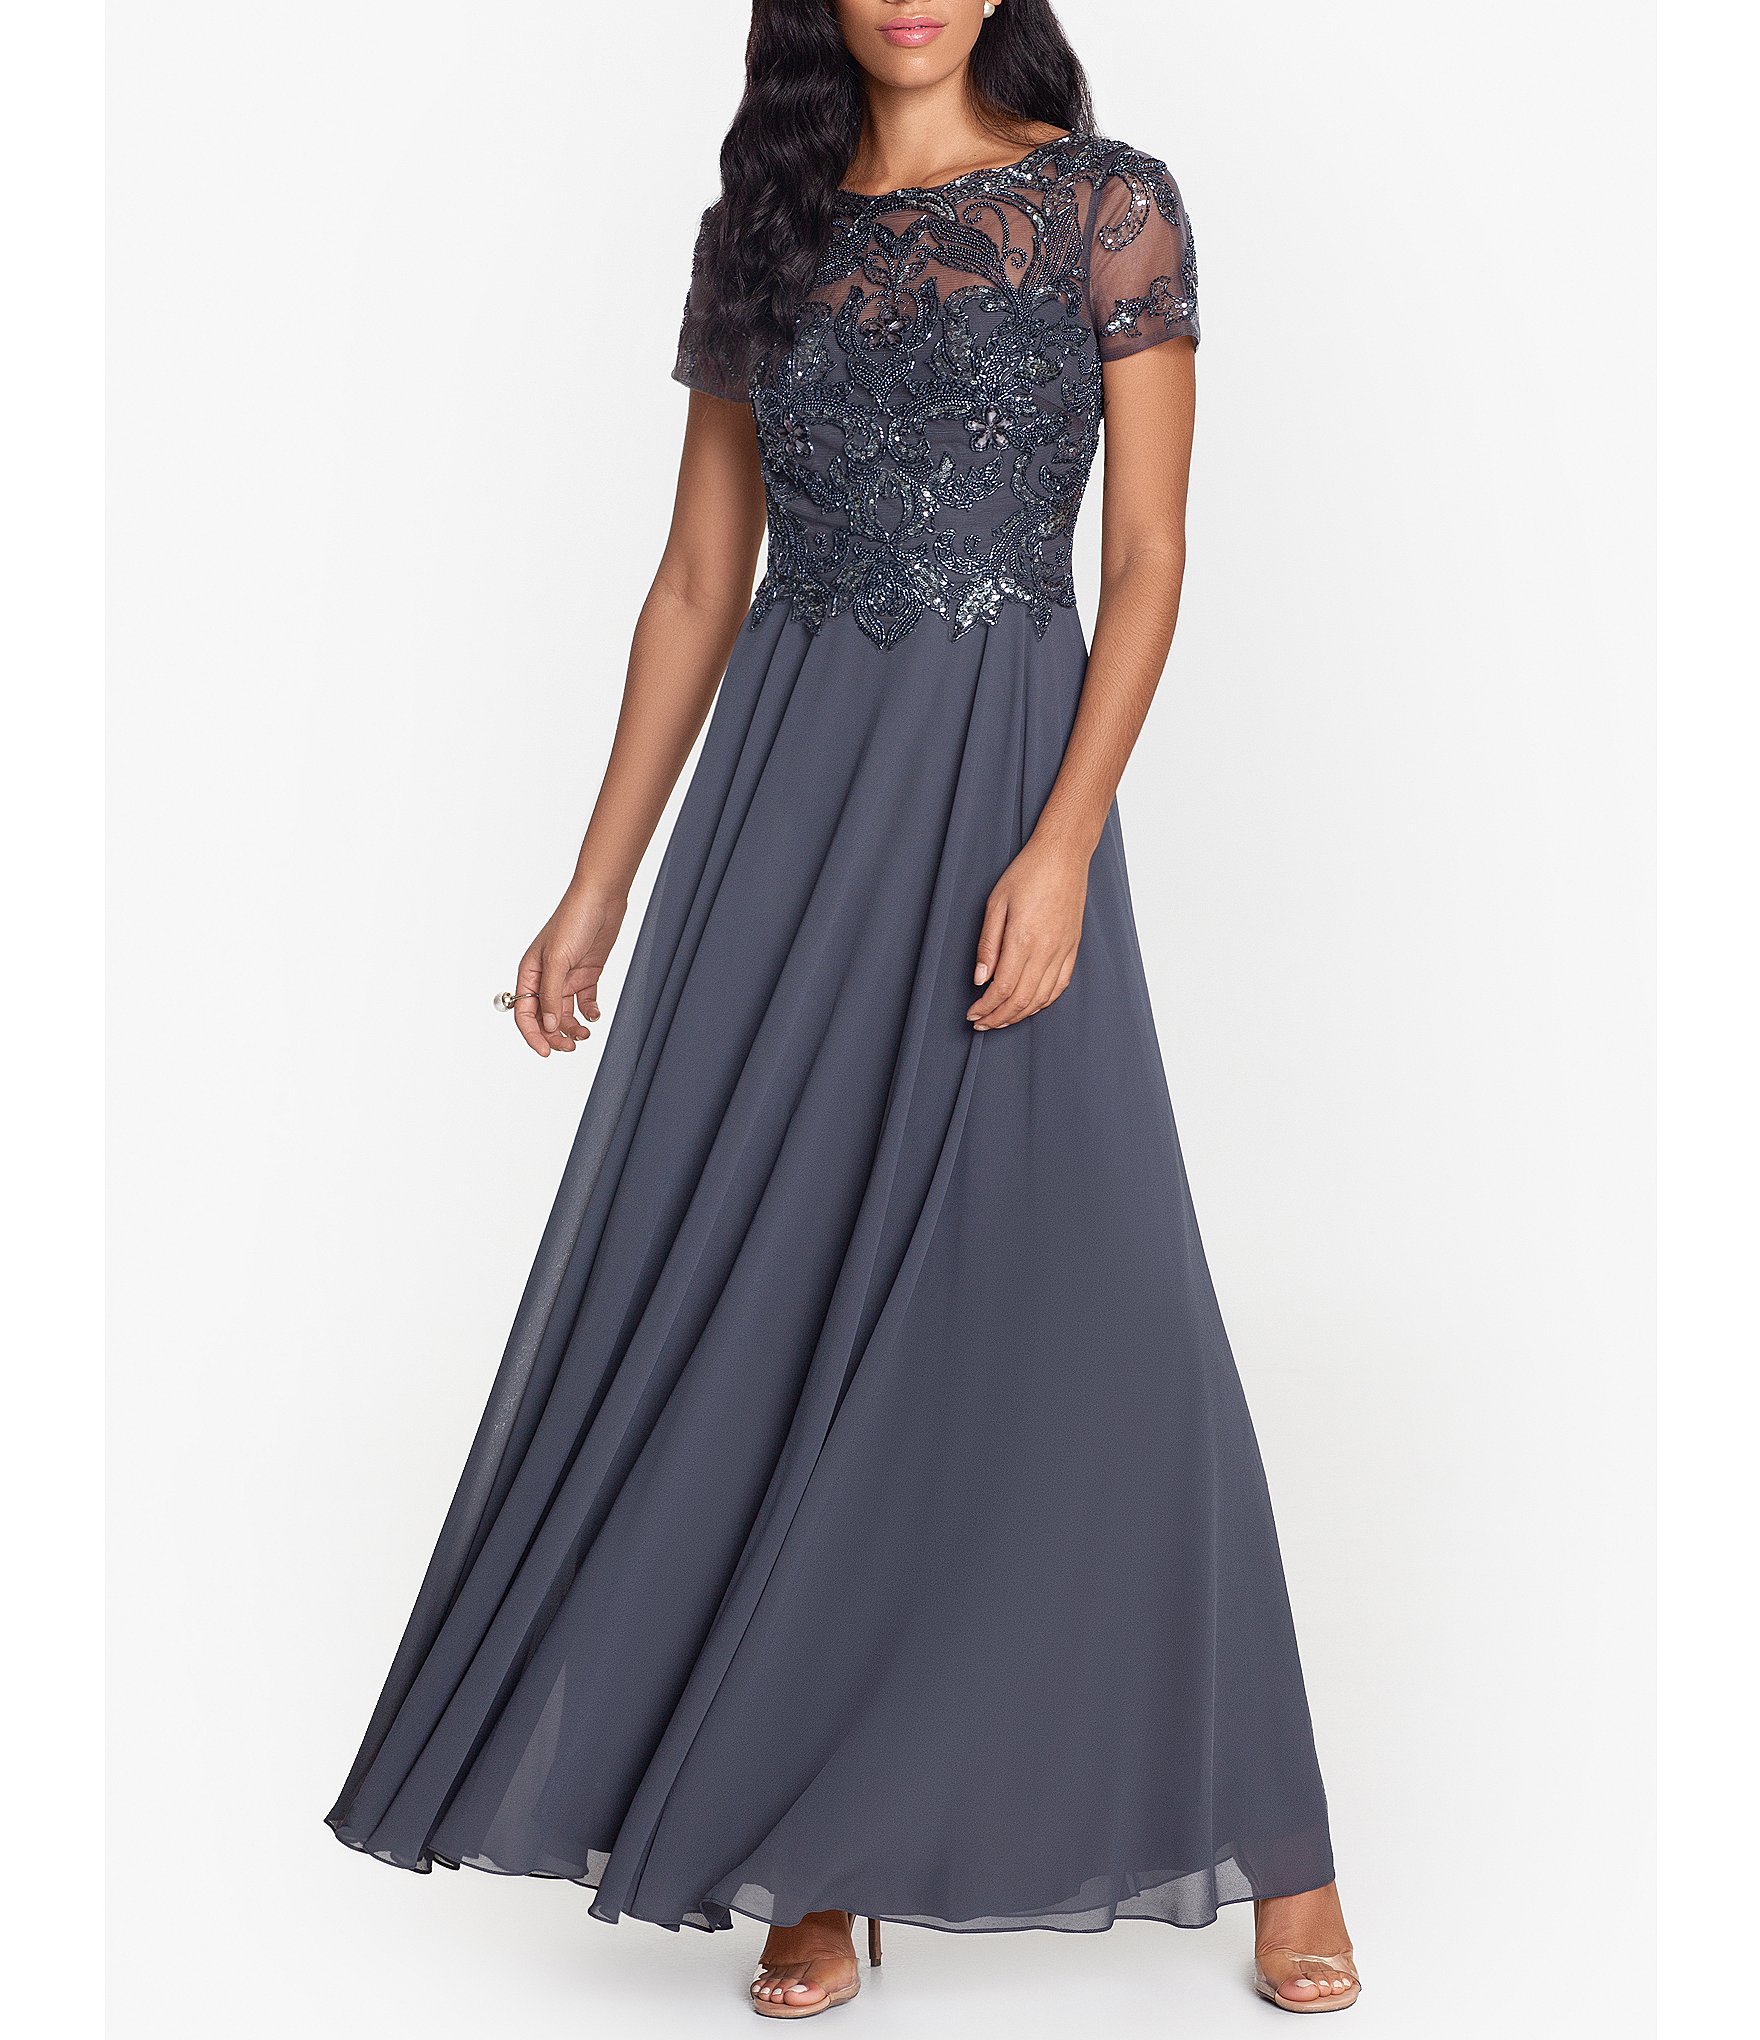 Grey Mother of the Bride Dresses & Gowns | Dillard's